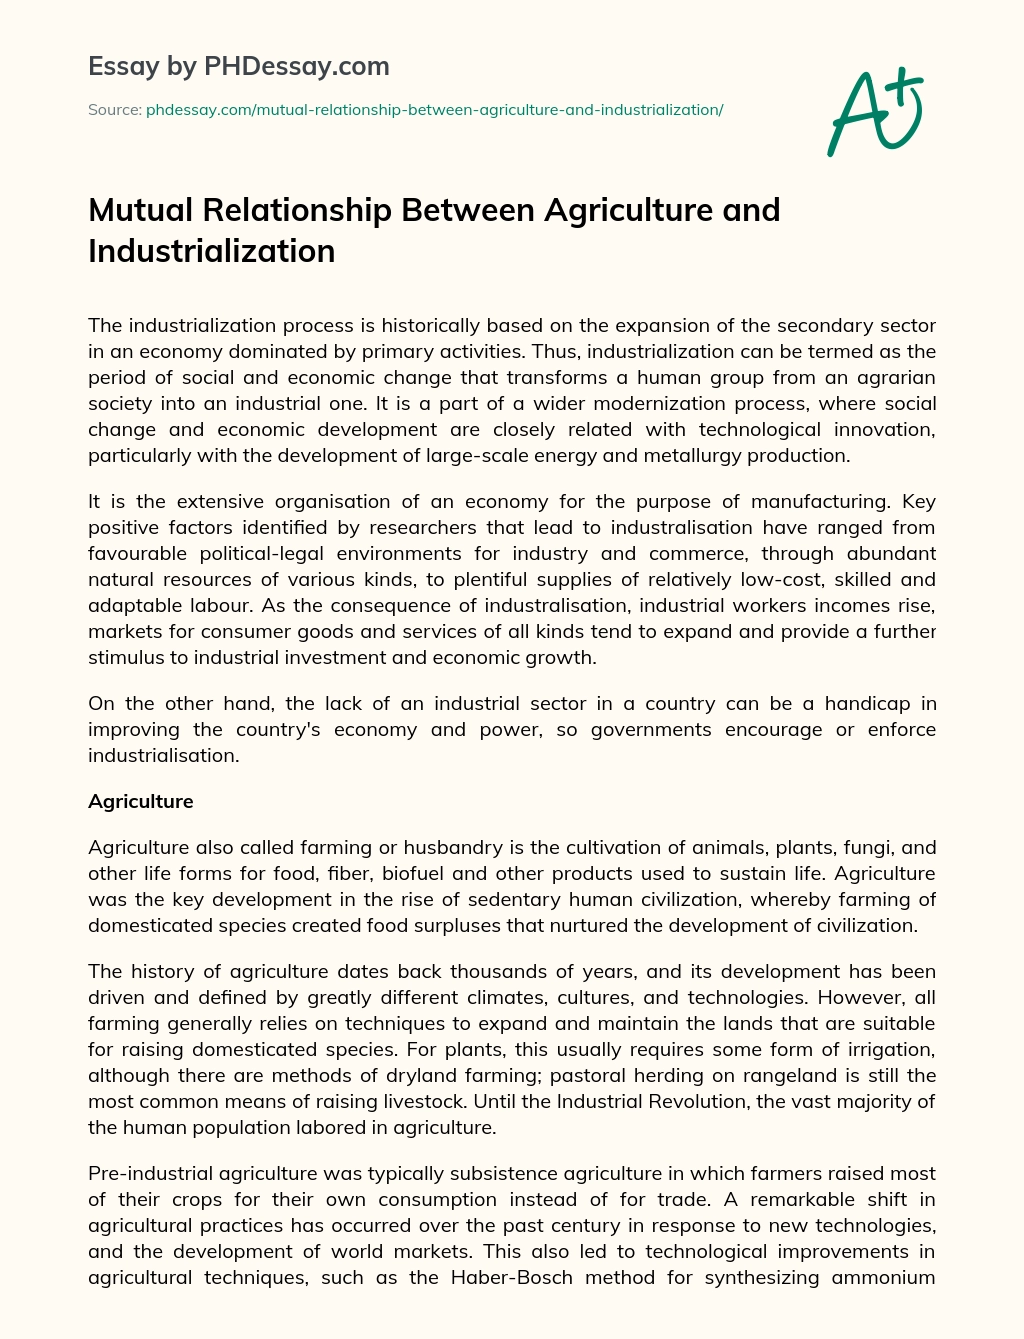 Mutual Relationship Between Agriculture and Industrialization essay